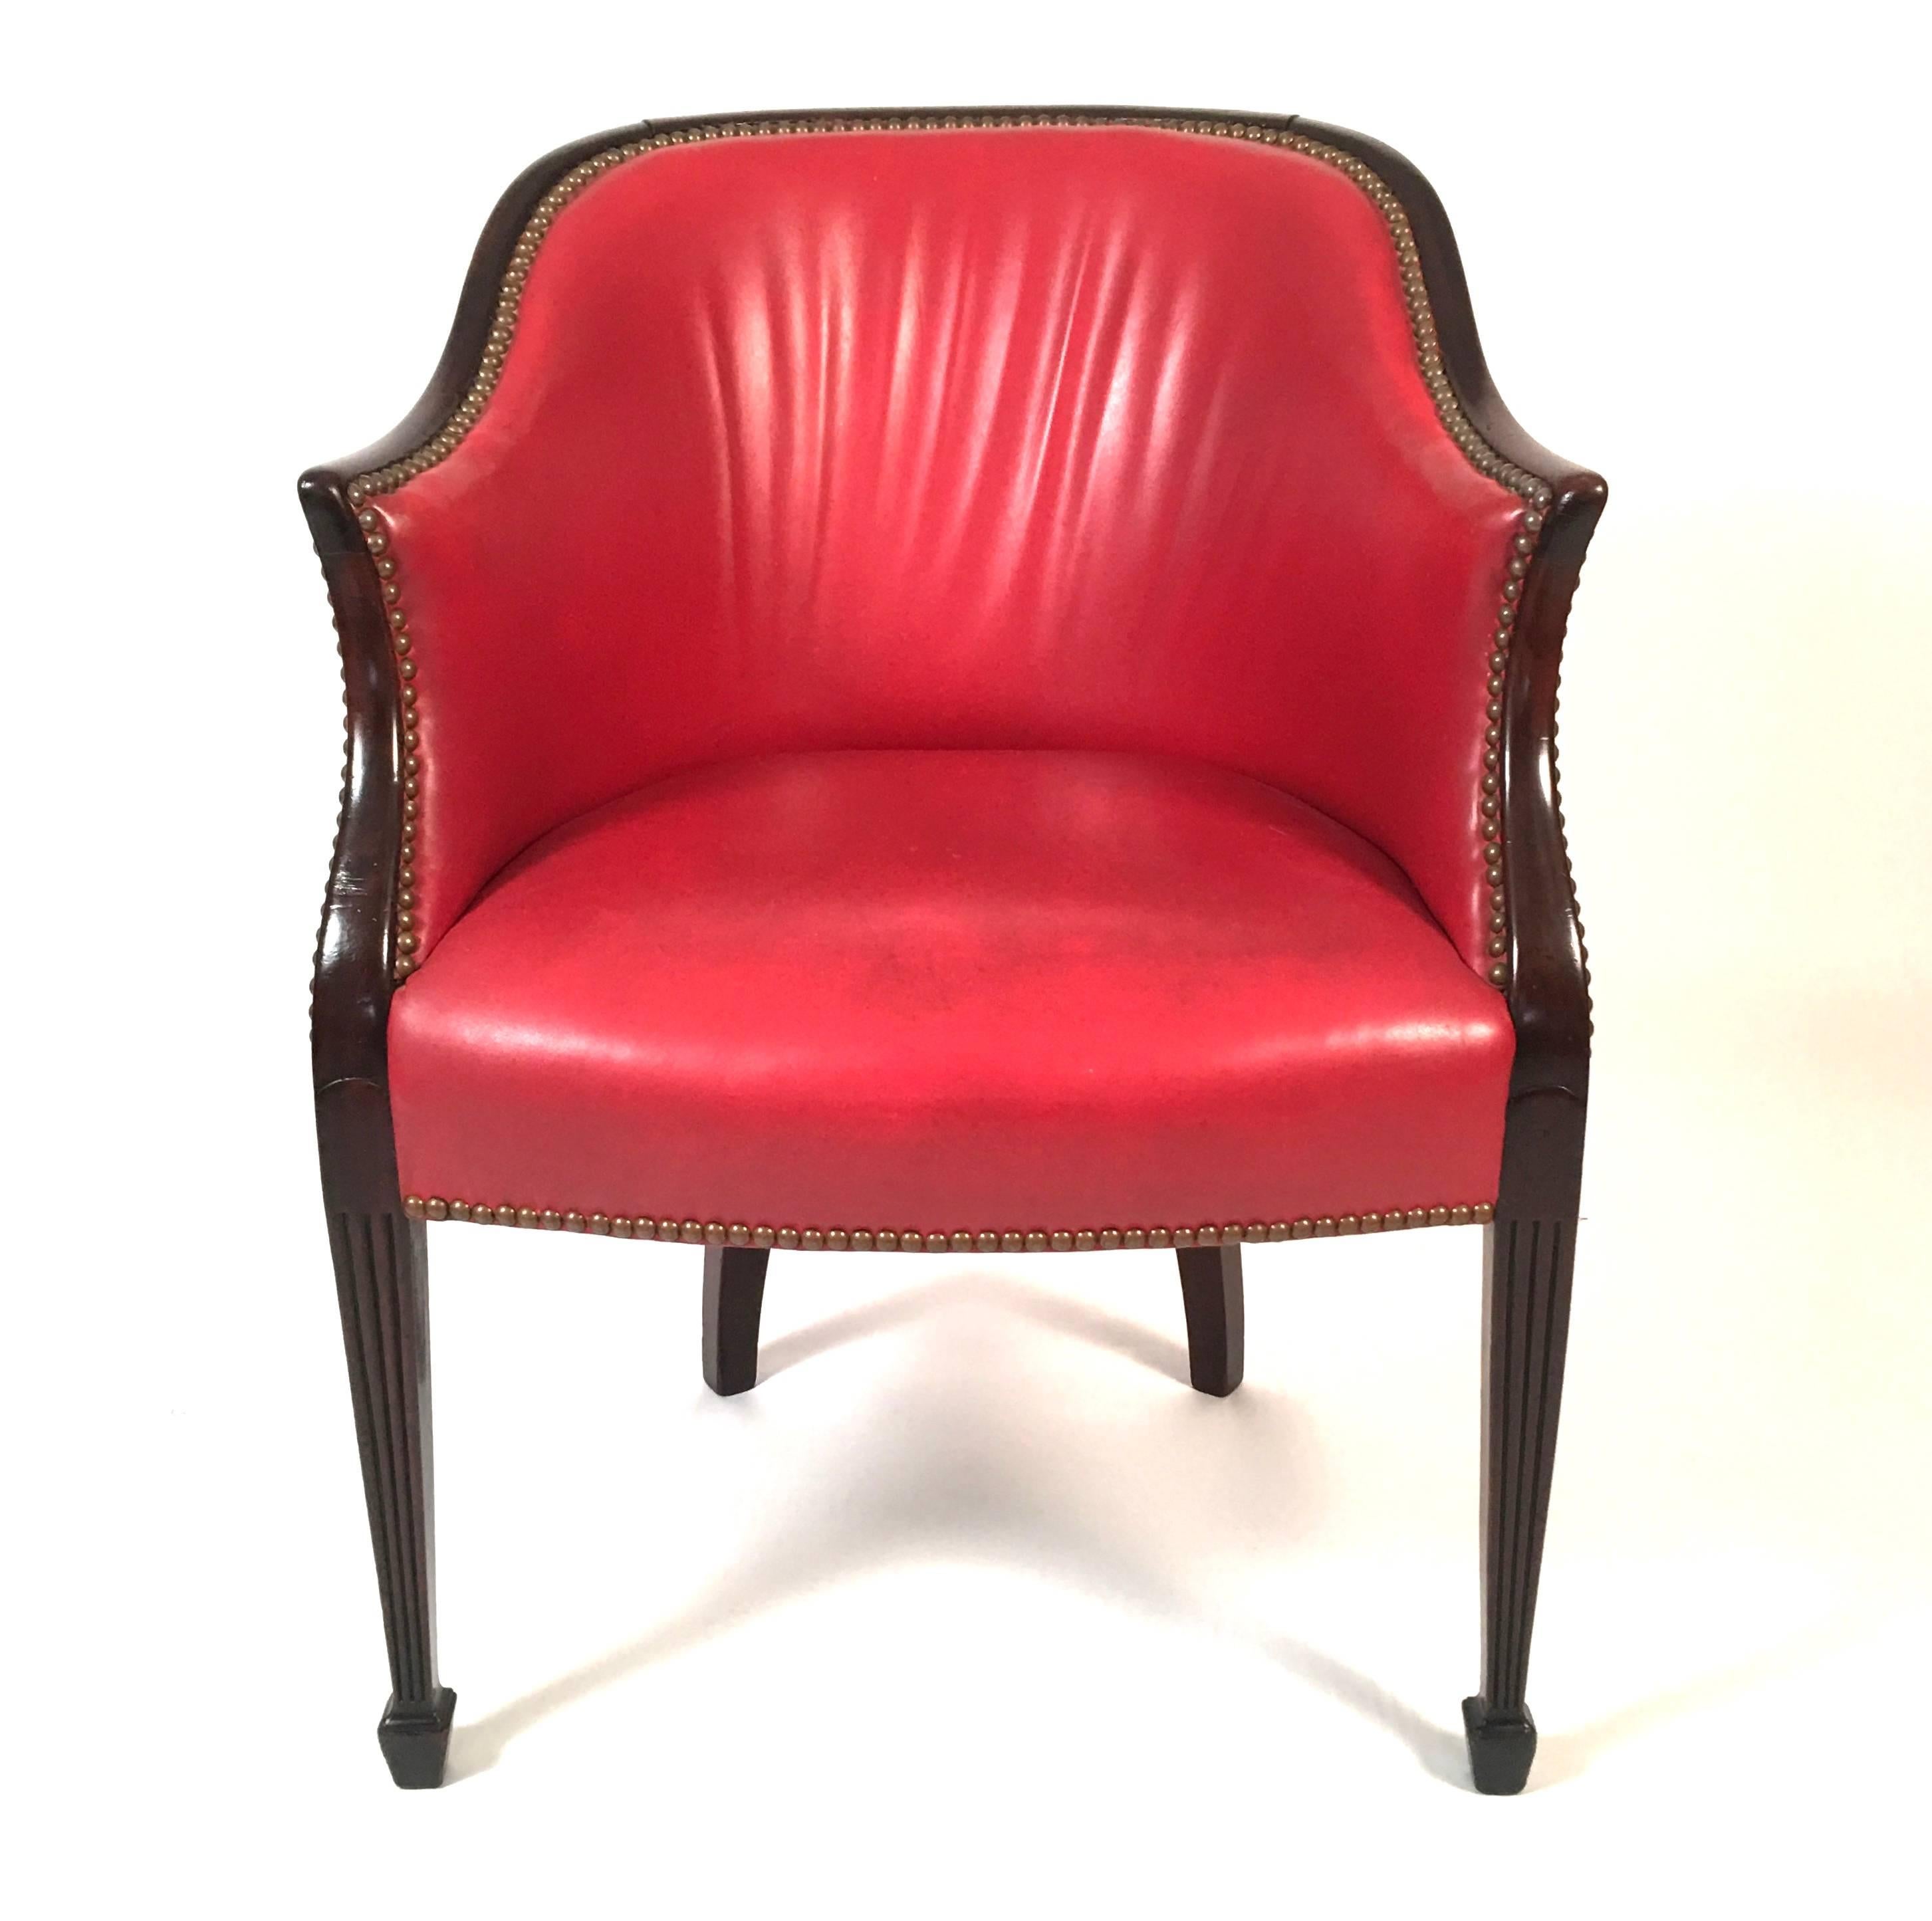 A George III period Hepplewhite barrel back chair in mahogany, upholstered in red leather with decorative brass tacks, the curved back leading to shaped, down swept arms, raised on two carved, fluted tapering square section legs terminating in spade